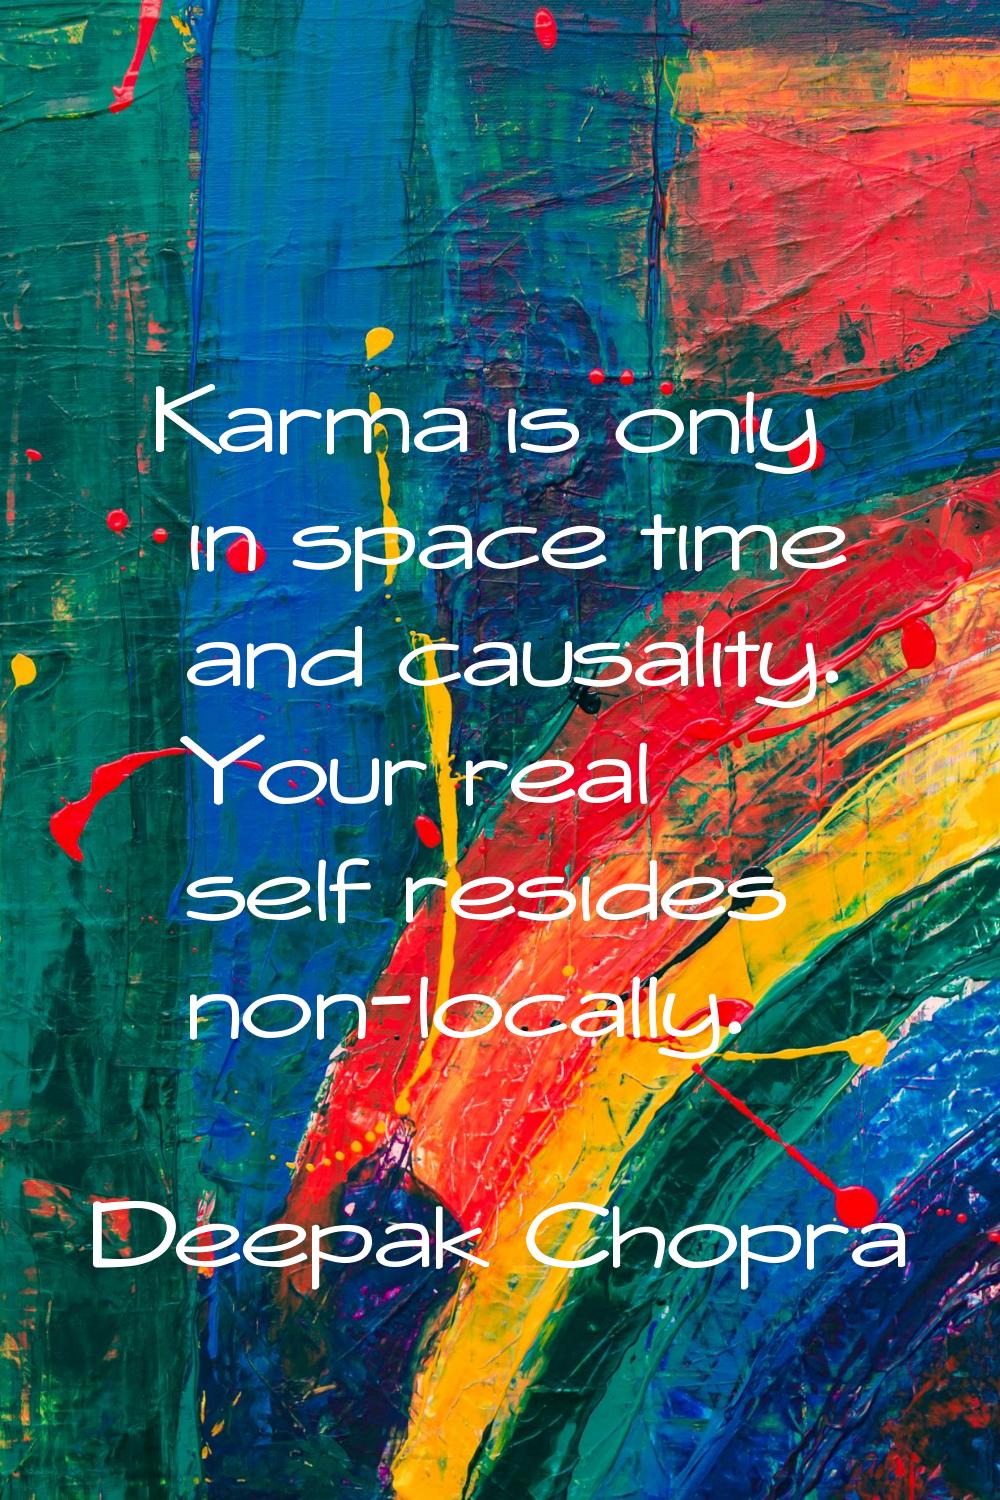 Karma is only in space time and causality. Your real self resides non-locally.